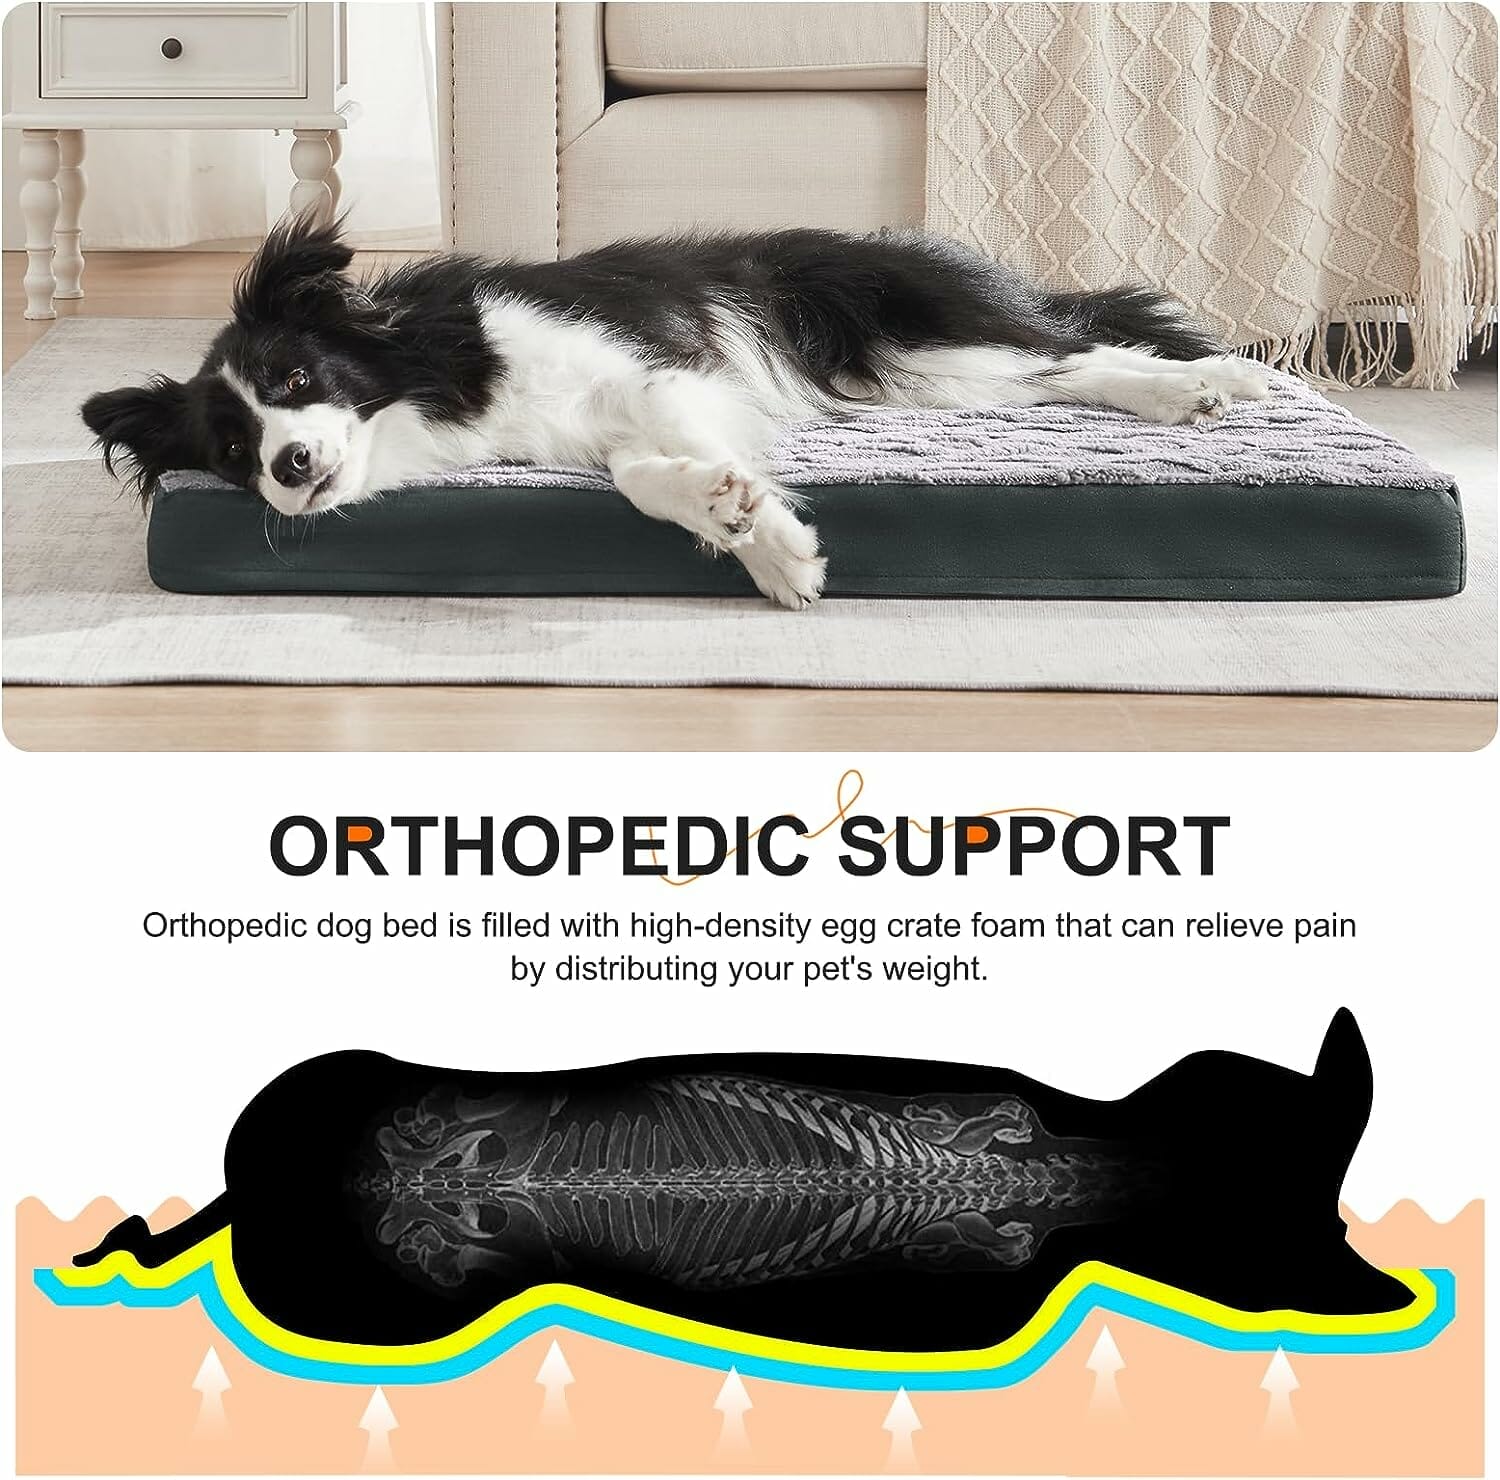 INVENHO Dog Bed Review – The Ultimate Comfort for Your Pup?